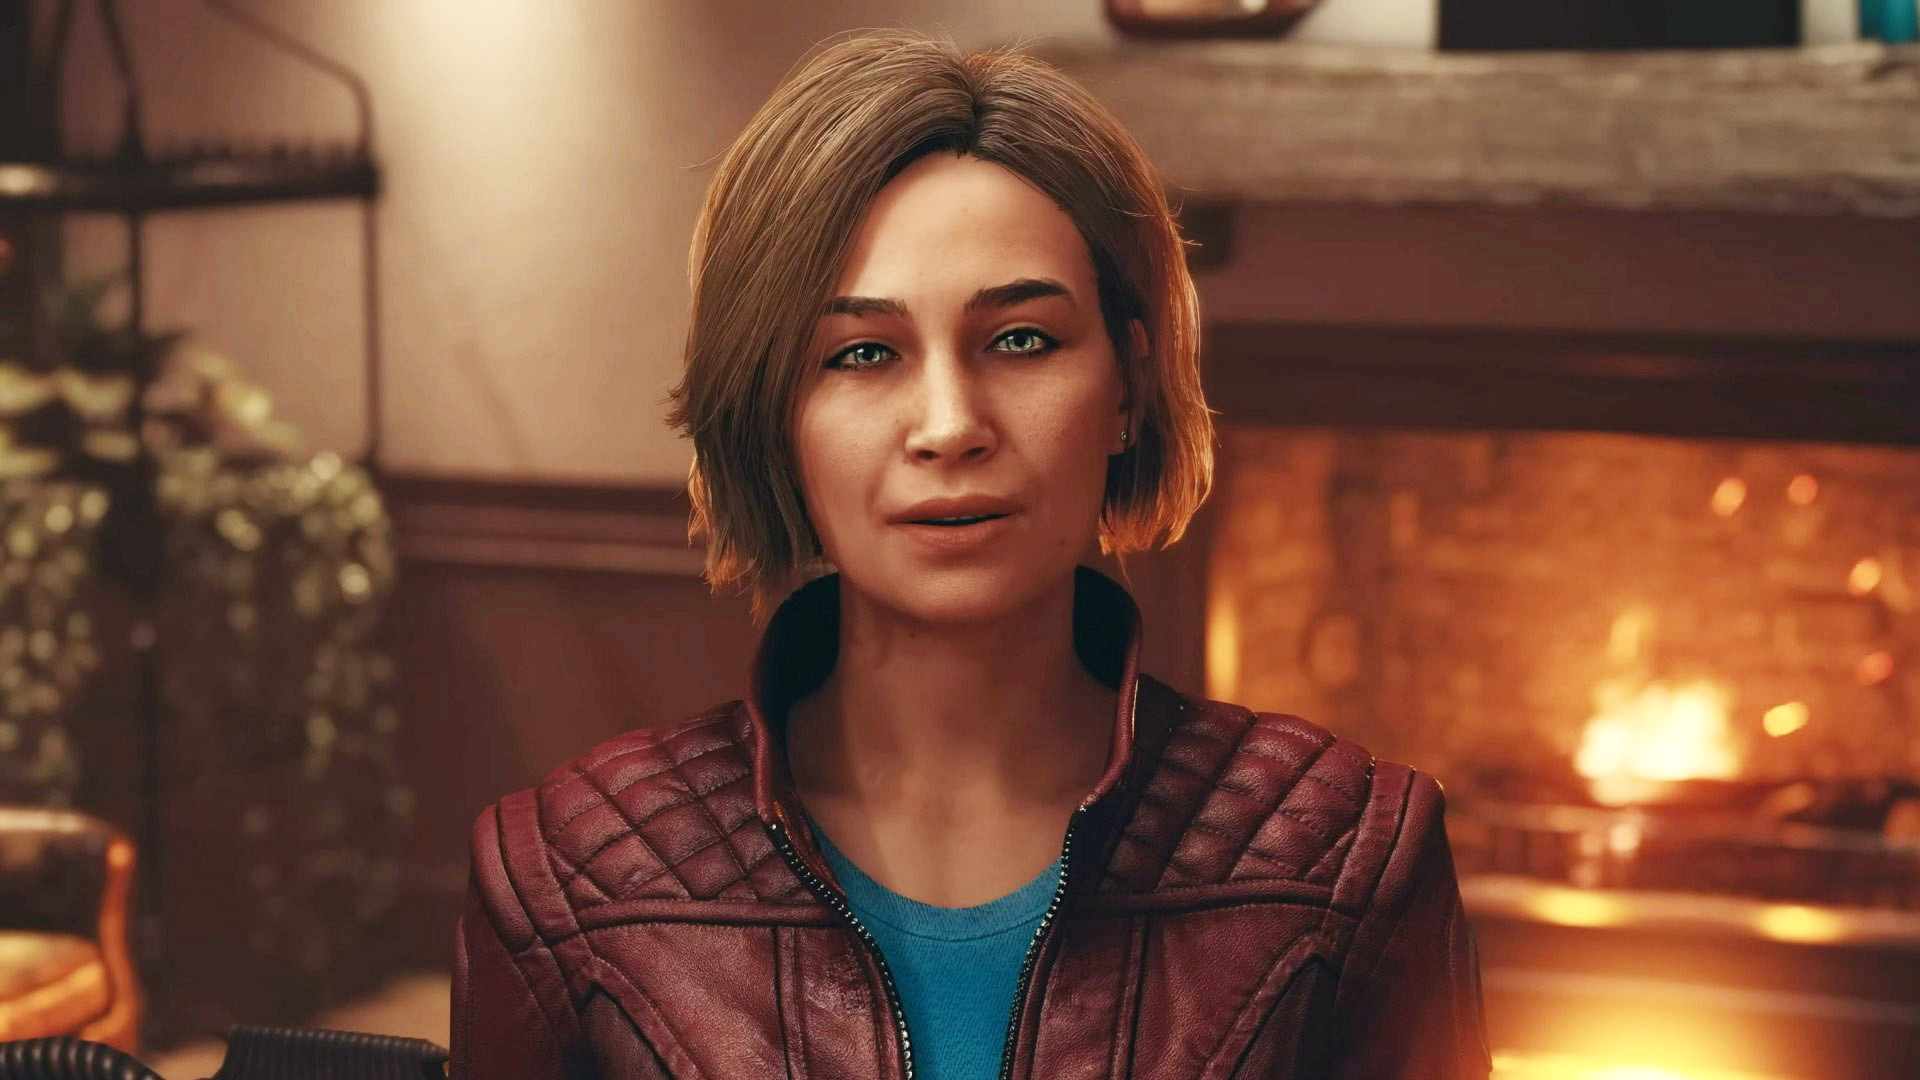 Sarah Morgan in Starfield is a character whose age seems to be a topic of discussion among fans. According to the information gathered from various sources, there are discrepancies regarding Sarah Morgan's age in the game. Some theories suggest that she should be in her late forties to mid-fifties based on her background as a veteran of the last interstellar war, while others argue that she appears much younger in the game, possibly in her early thirties at most. The exact age of Sarah Morgan in Starfield remains ambiguous due to these conflicting details and fan theories